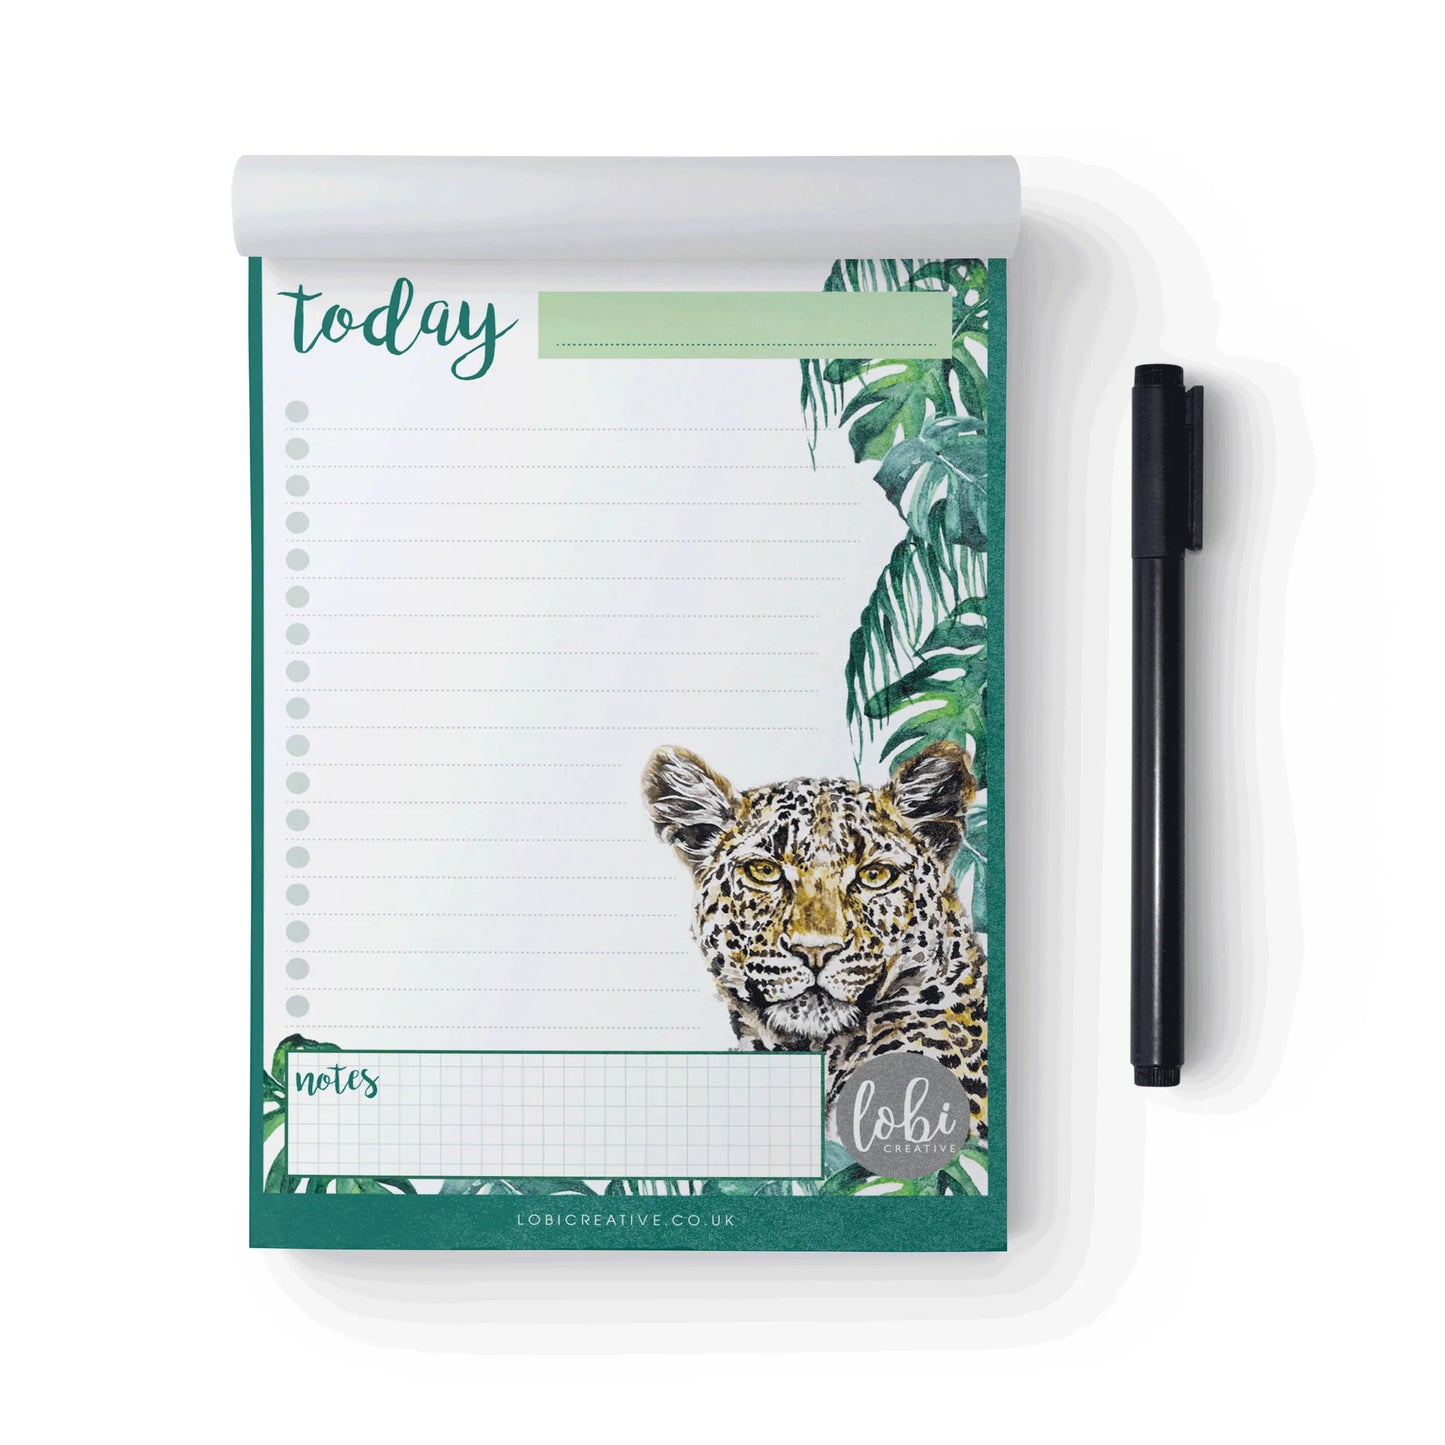 Leopard design notepad for todays lists